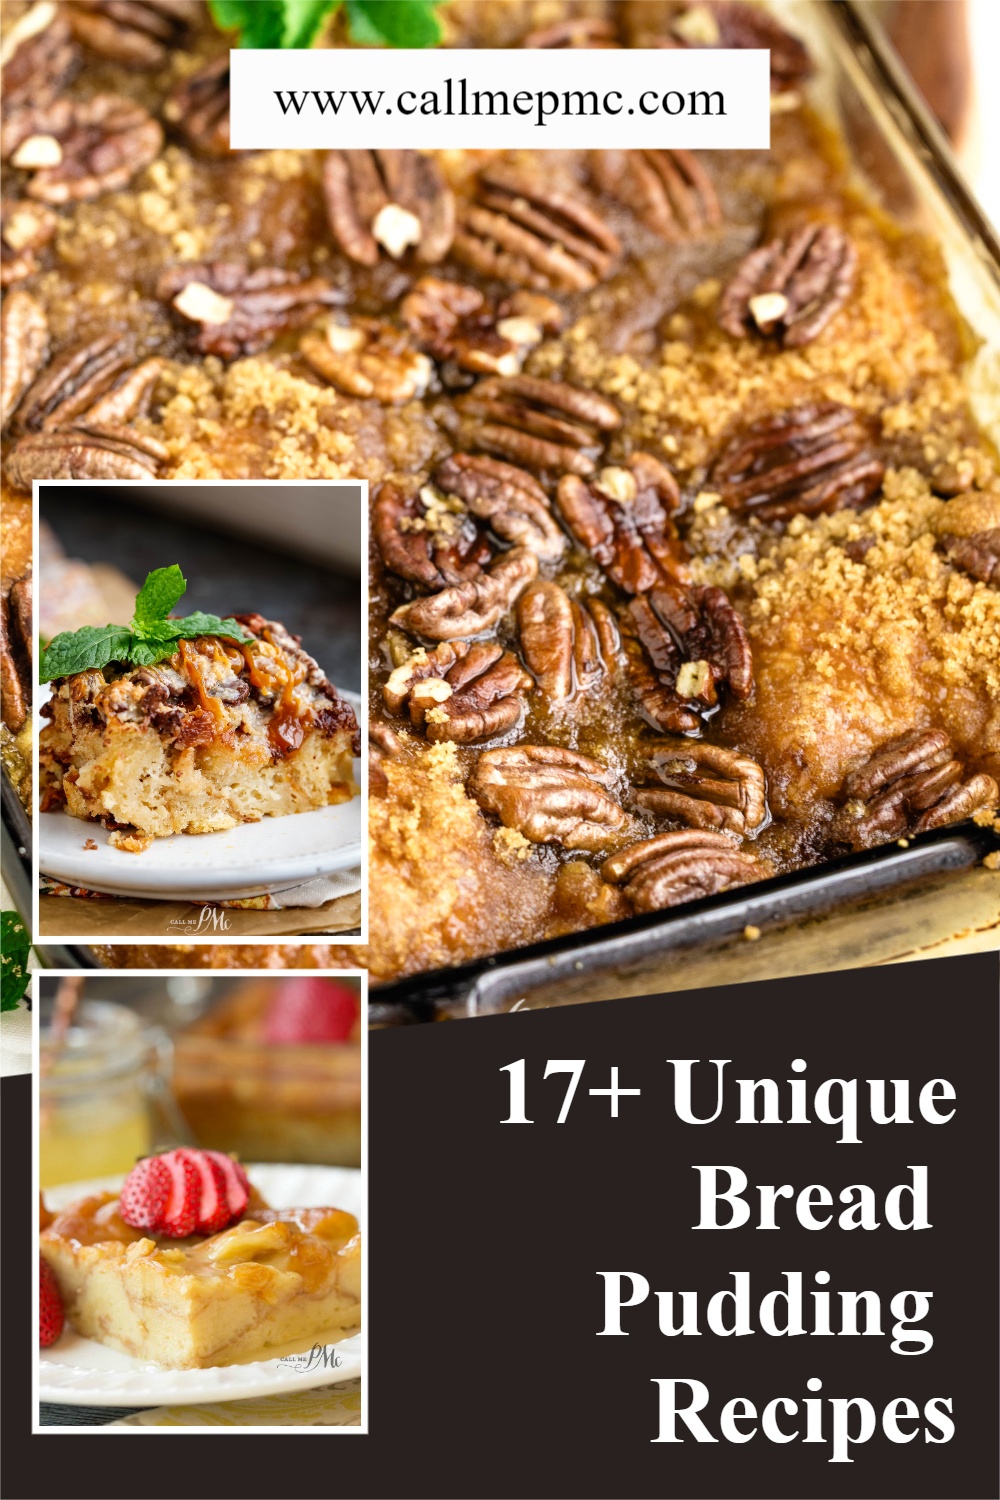 Discover a collection of 17 exclusive bread pudding recipes that will tantalize your taste buds and bring comfort to your dessert repertoire.